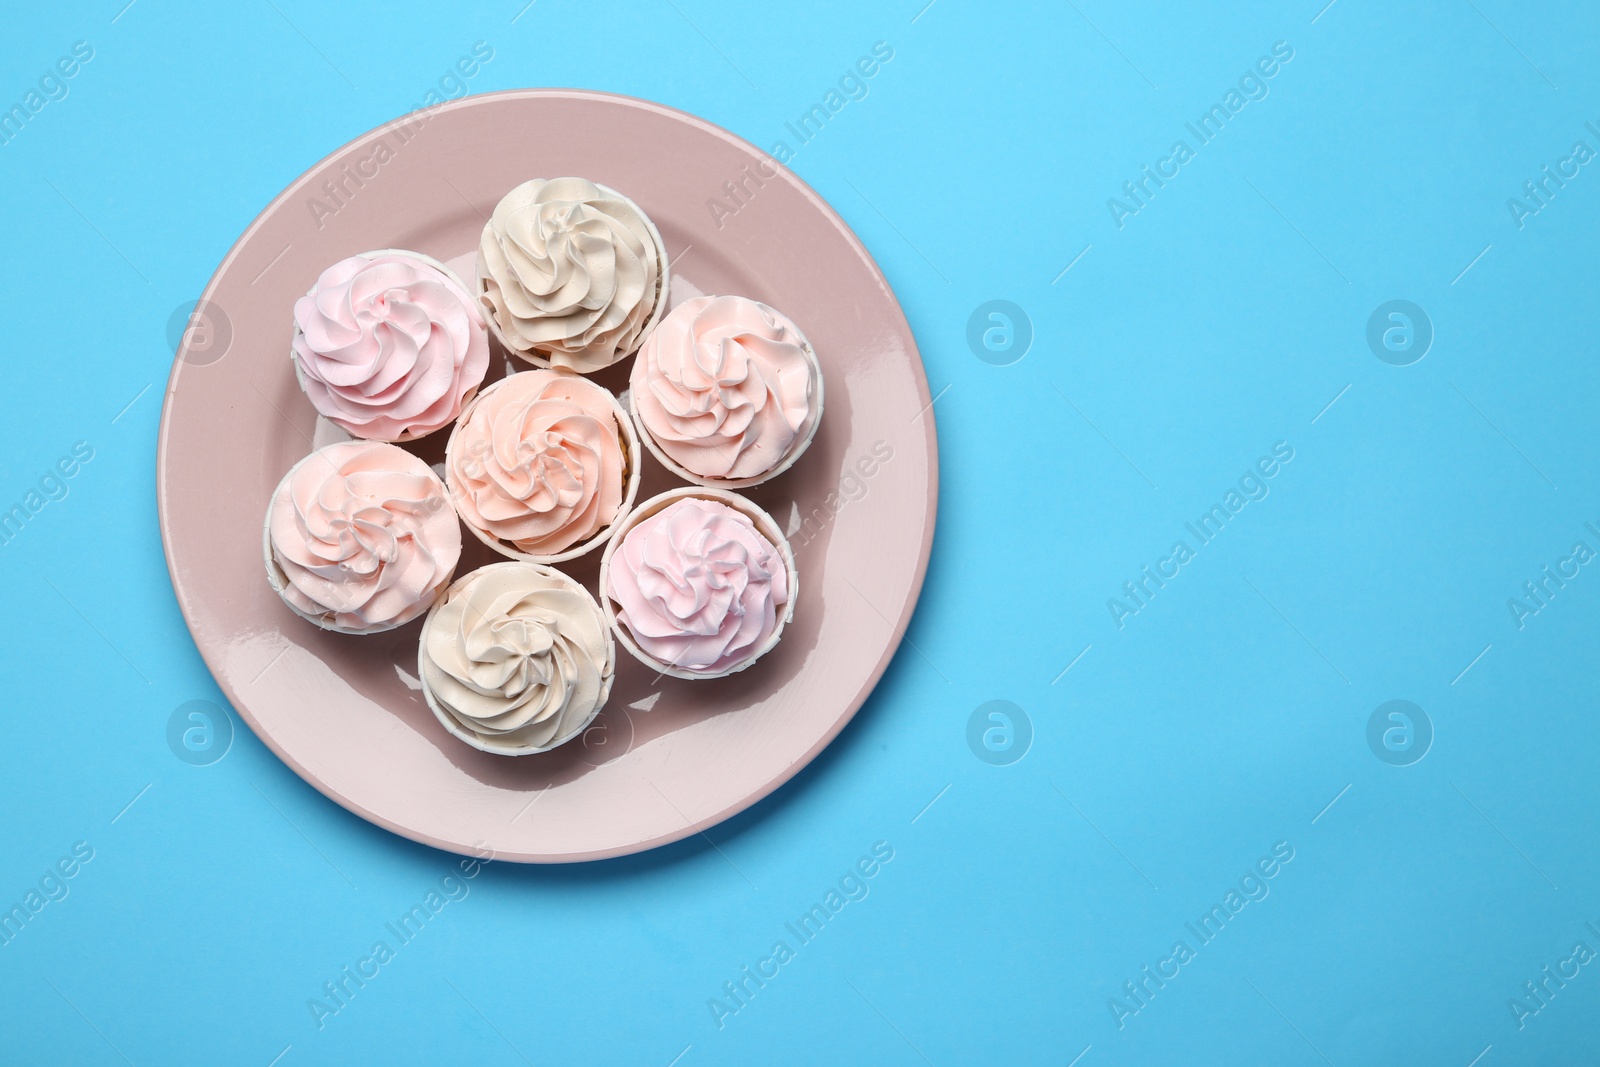 Photo of Plate with tasty cupcakes on light blue background, top view. Space for text